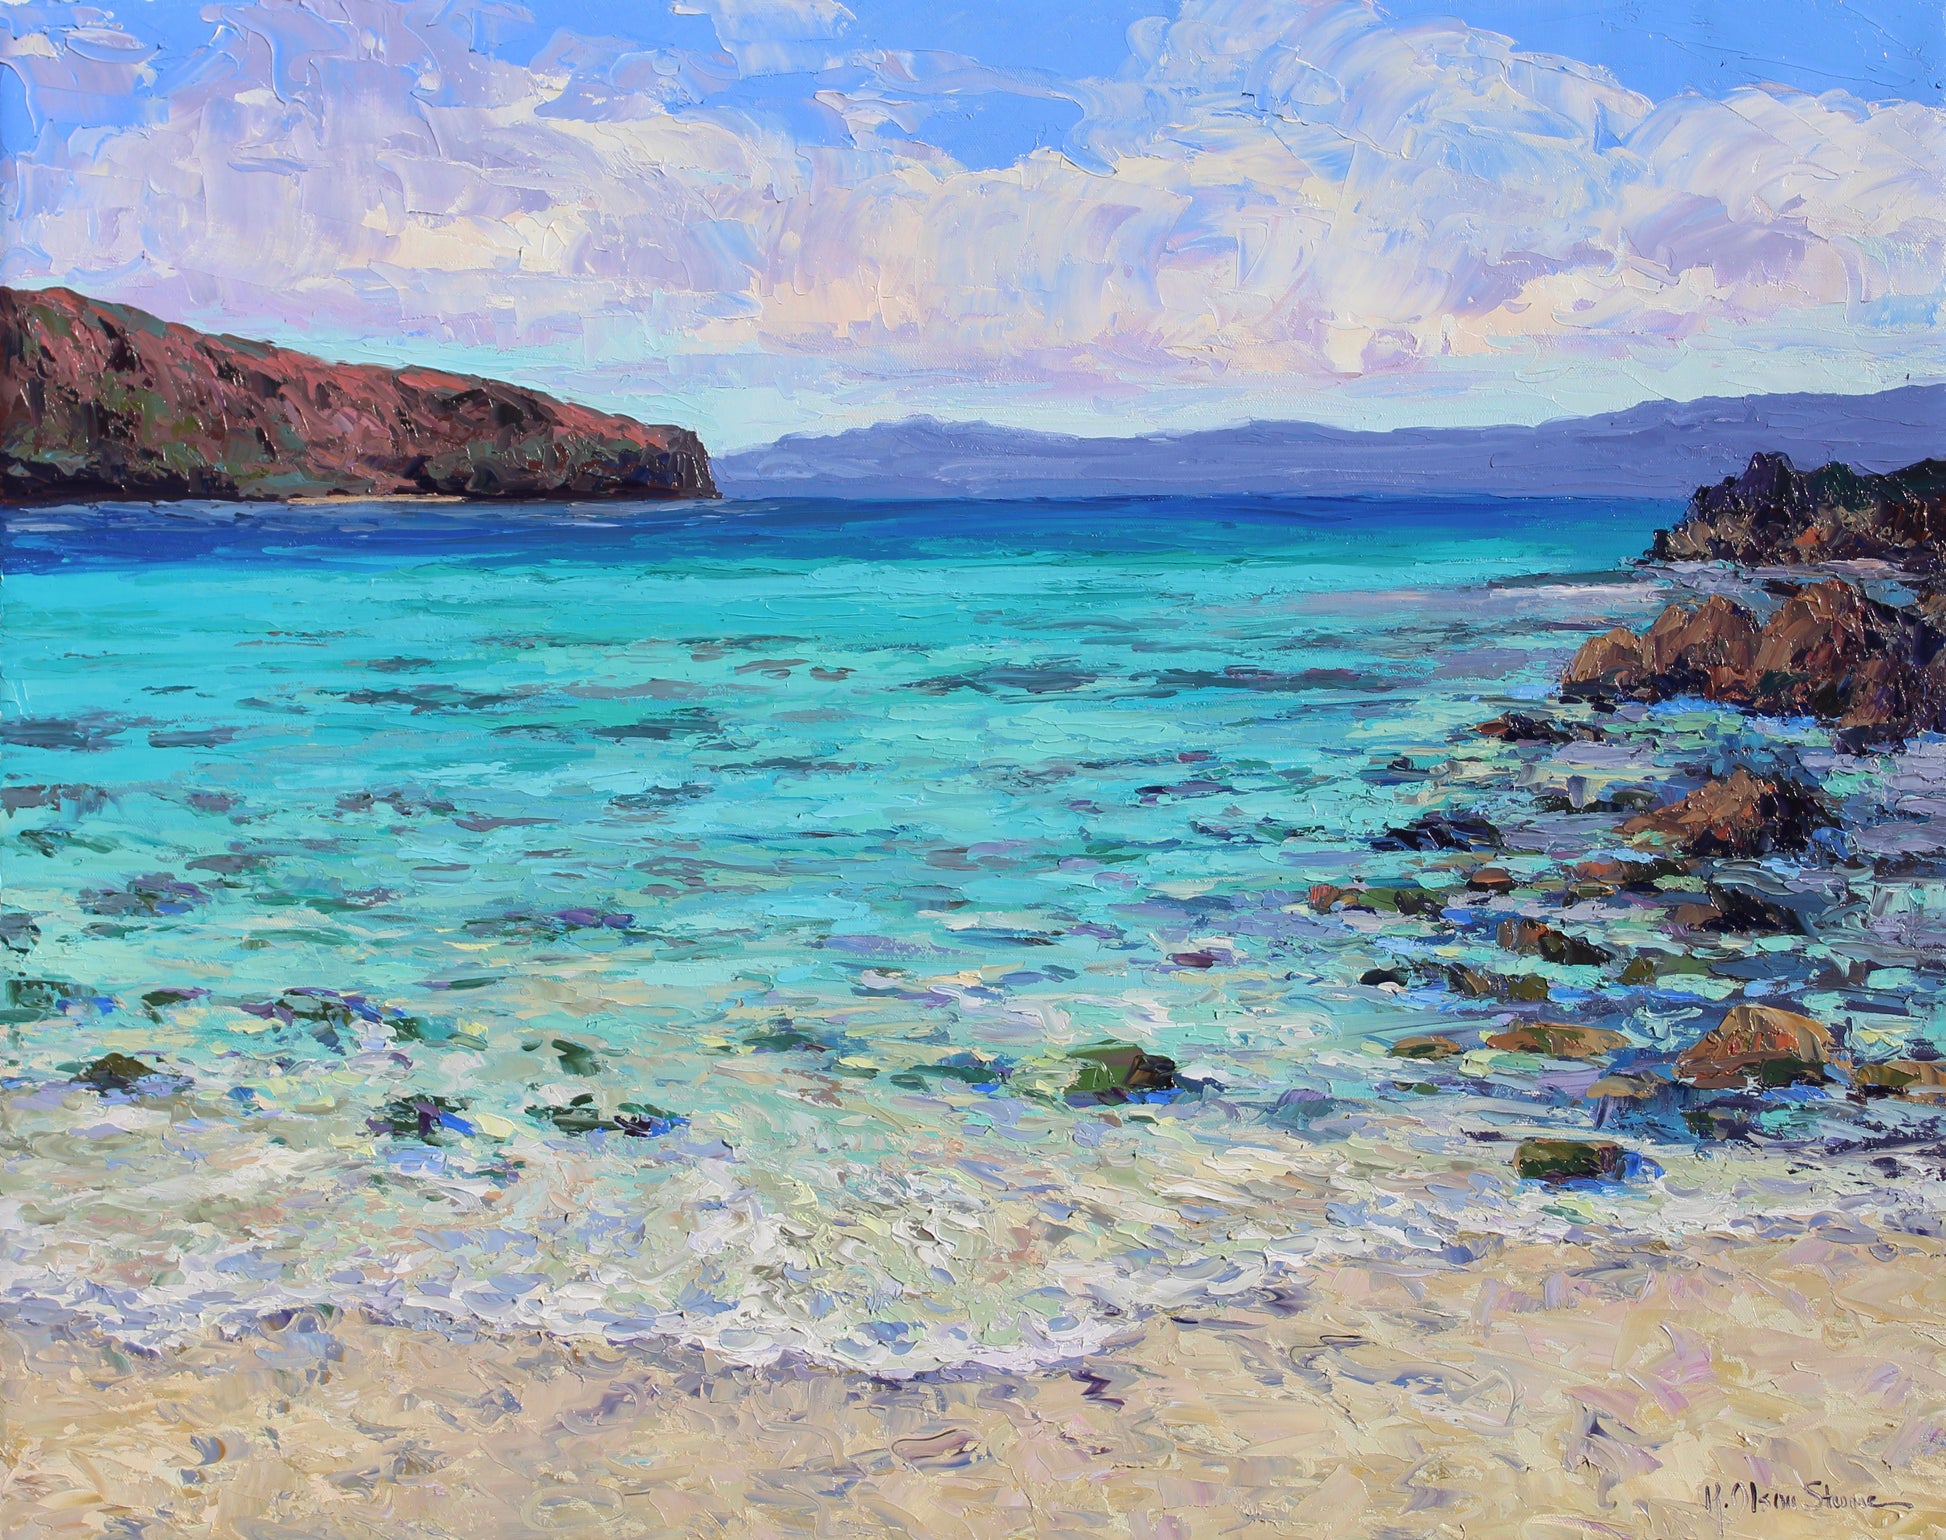 textured oil painting with turquoise blue, teal water, reddish brown sea rocks and a sandy beach.  Blue sky with light, puffy clouds.  Mexican seascape of Balandra Bay in La Paz Mexico